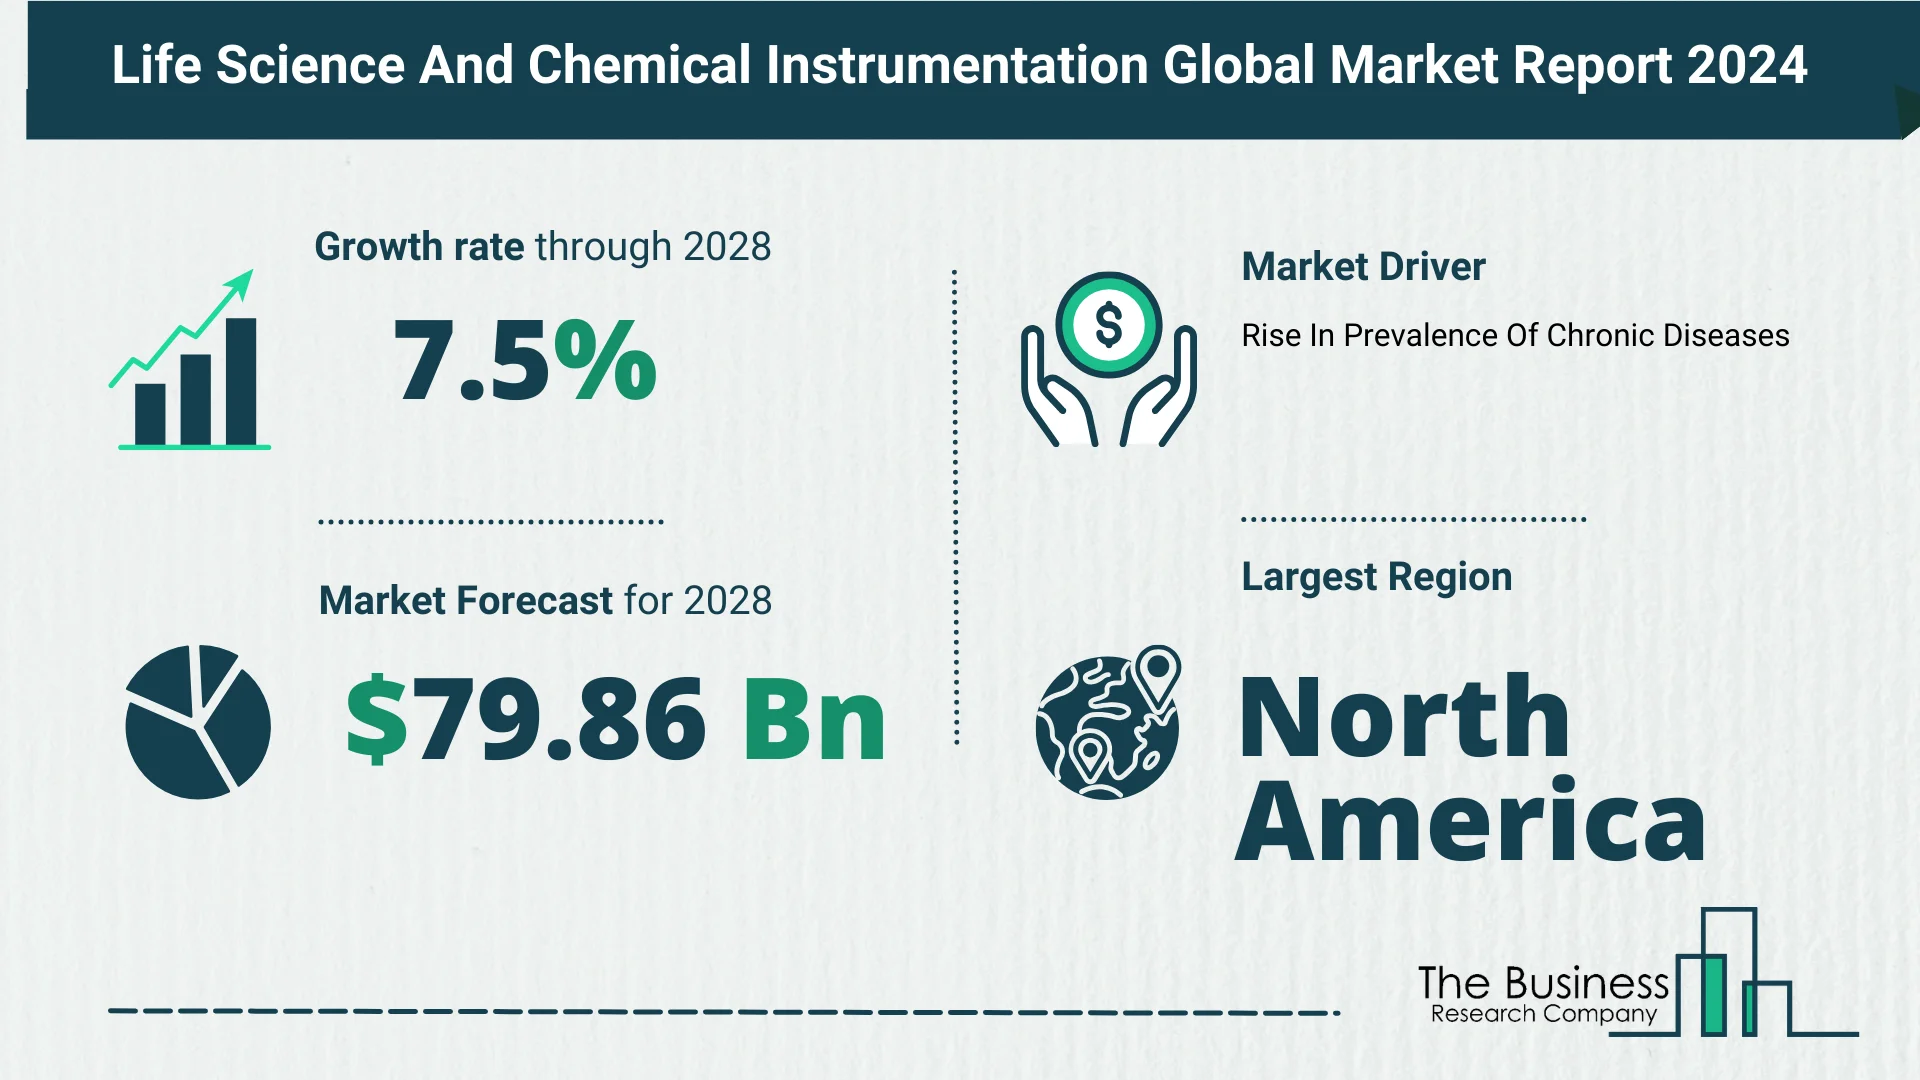 Top 5 Insights From The Life Science And Chemical Instrumentation Market Report 2024